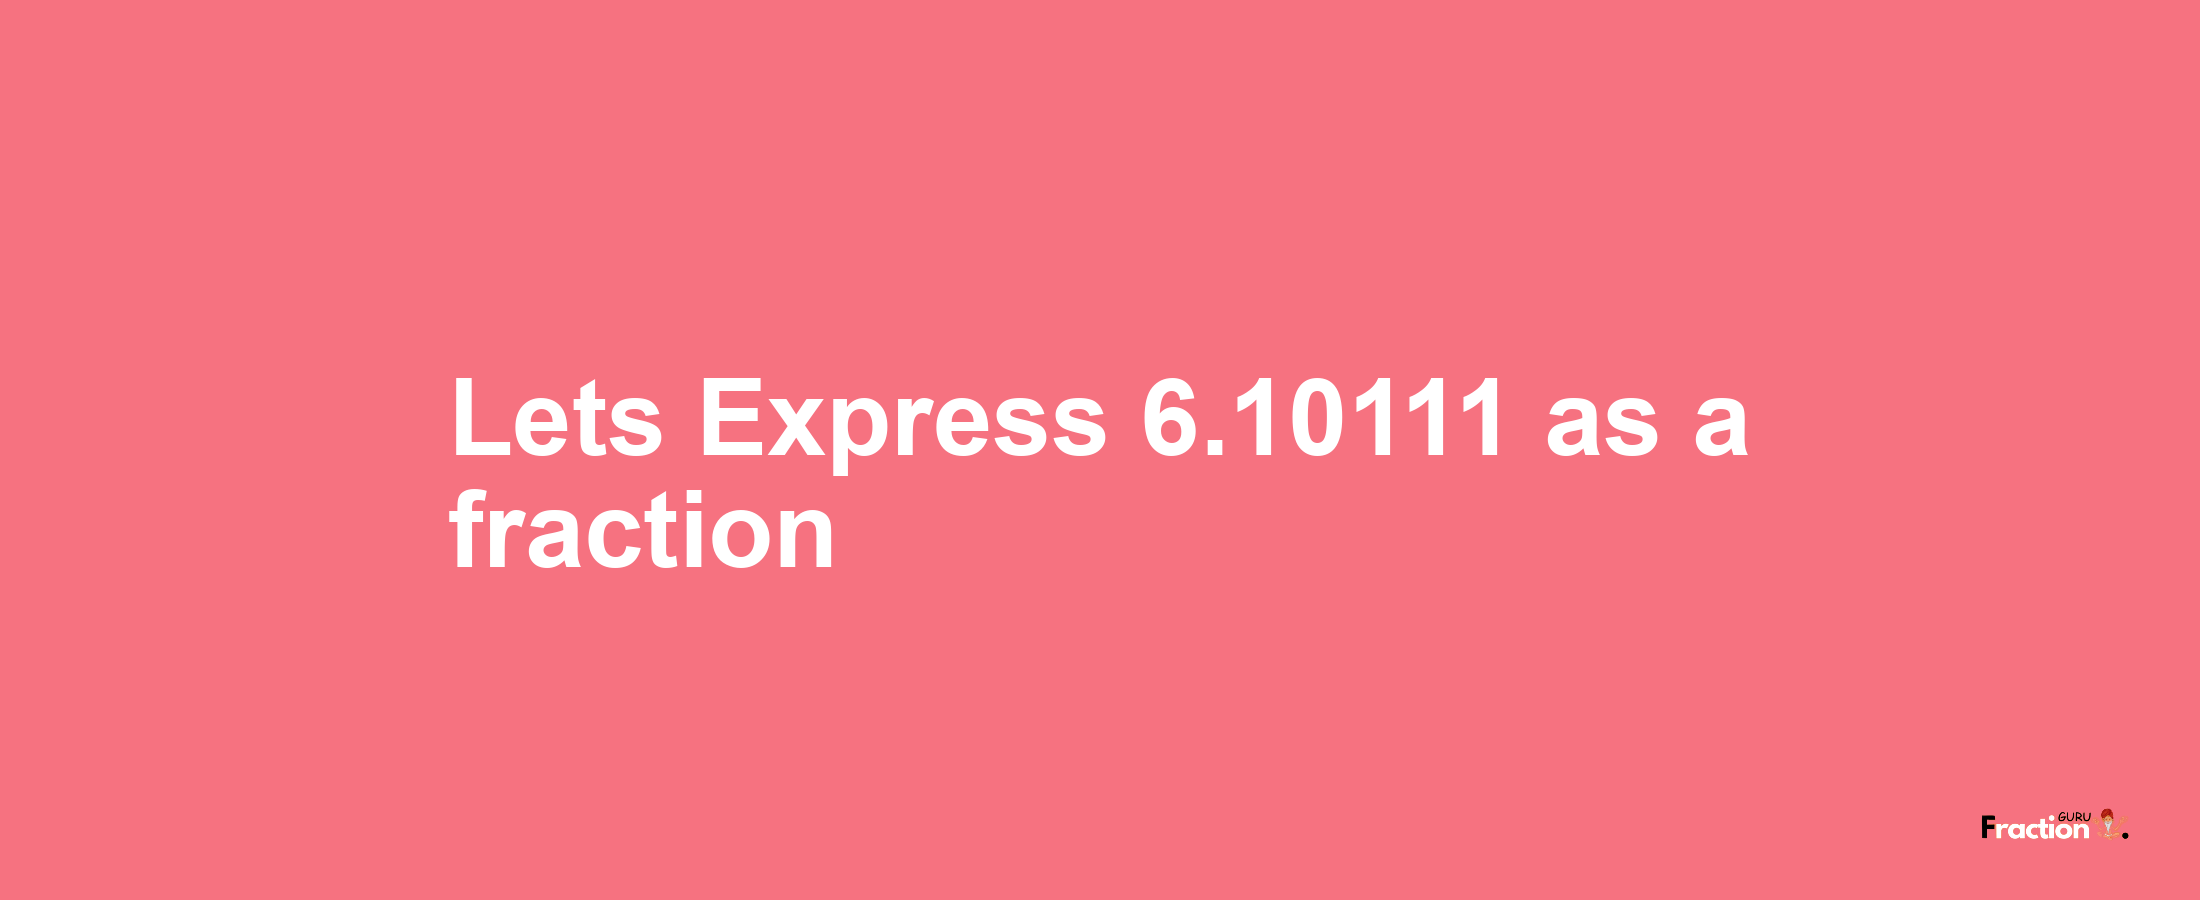 Lets Express 6.10111 as afraction